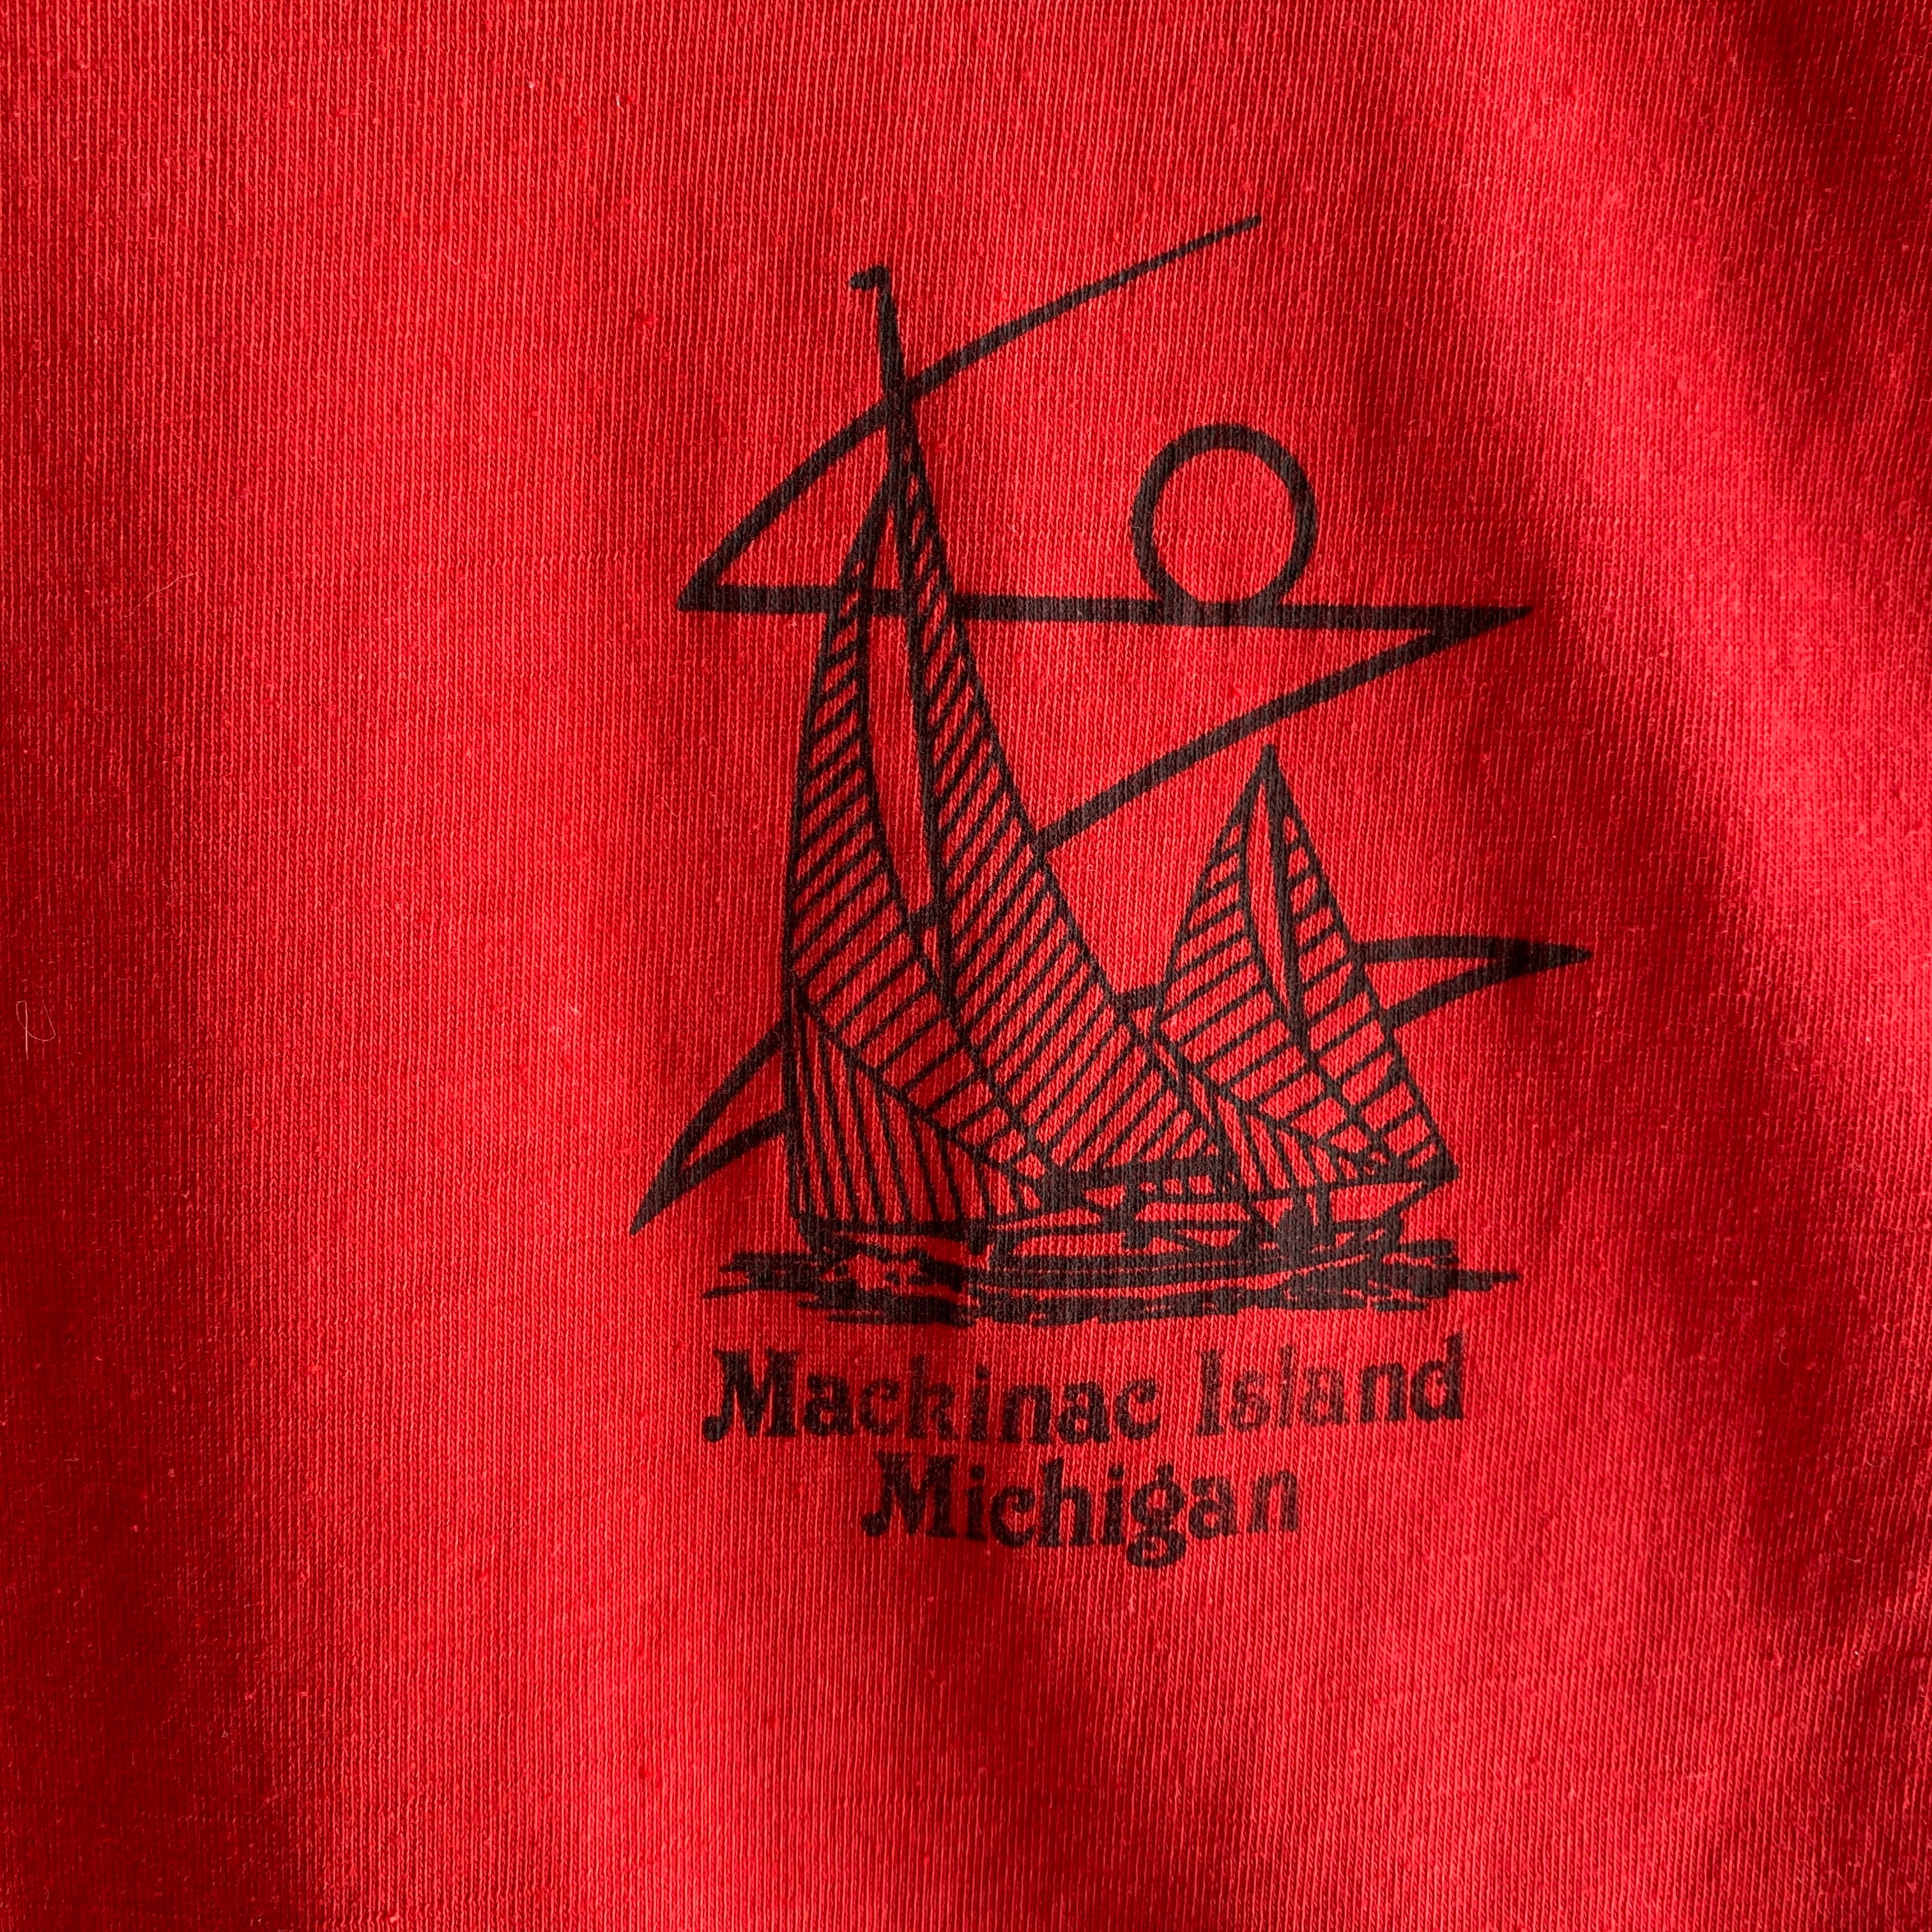 1980s (Early) Mackinac Island T-Shirt with Mesh Sides